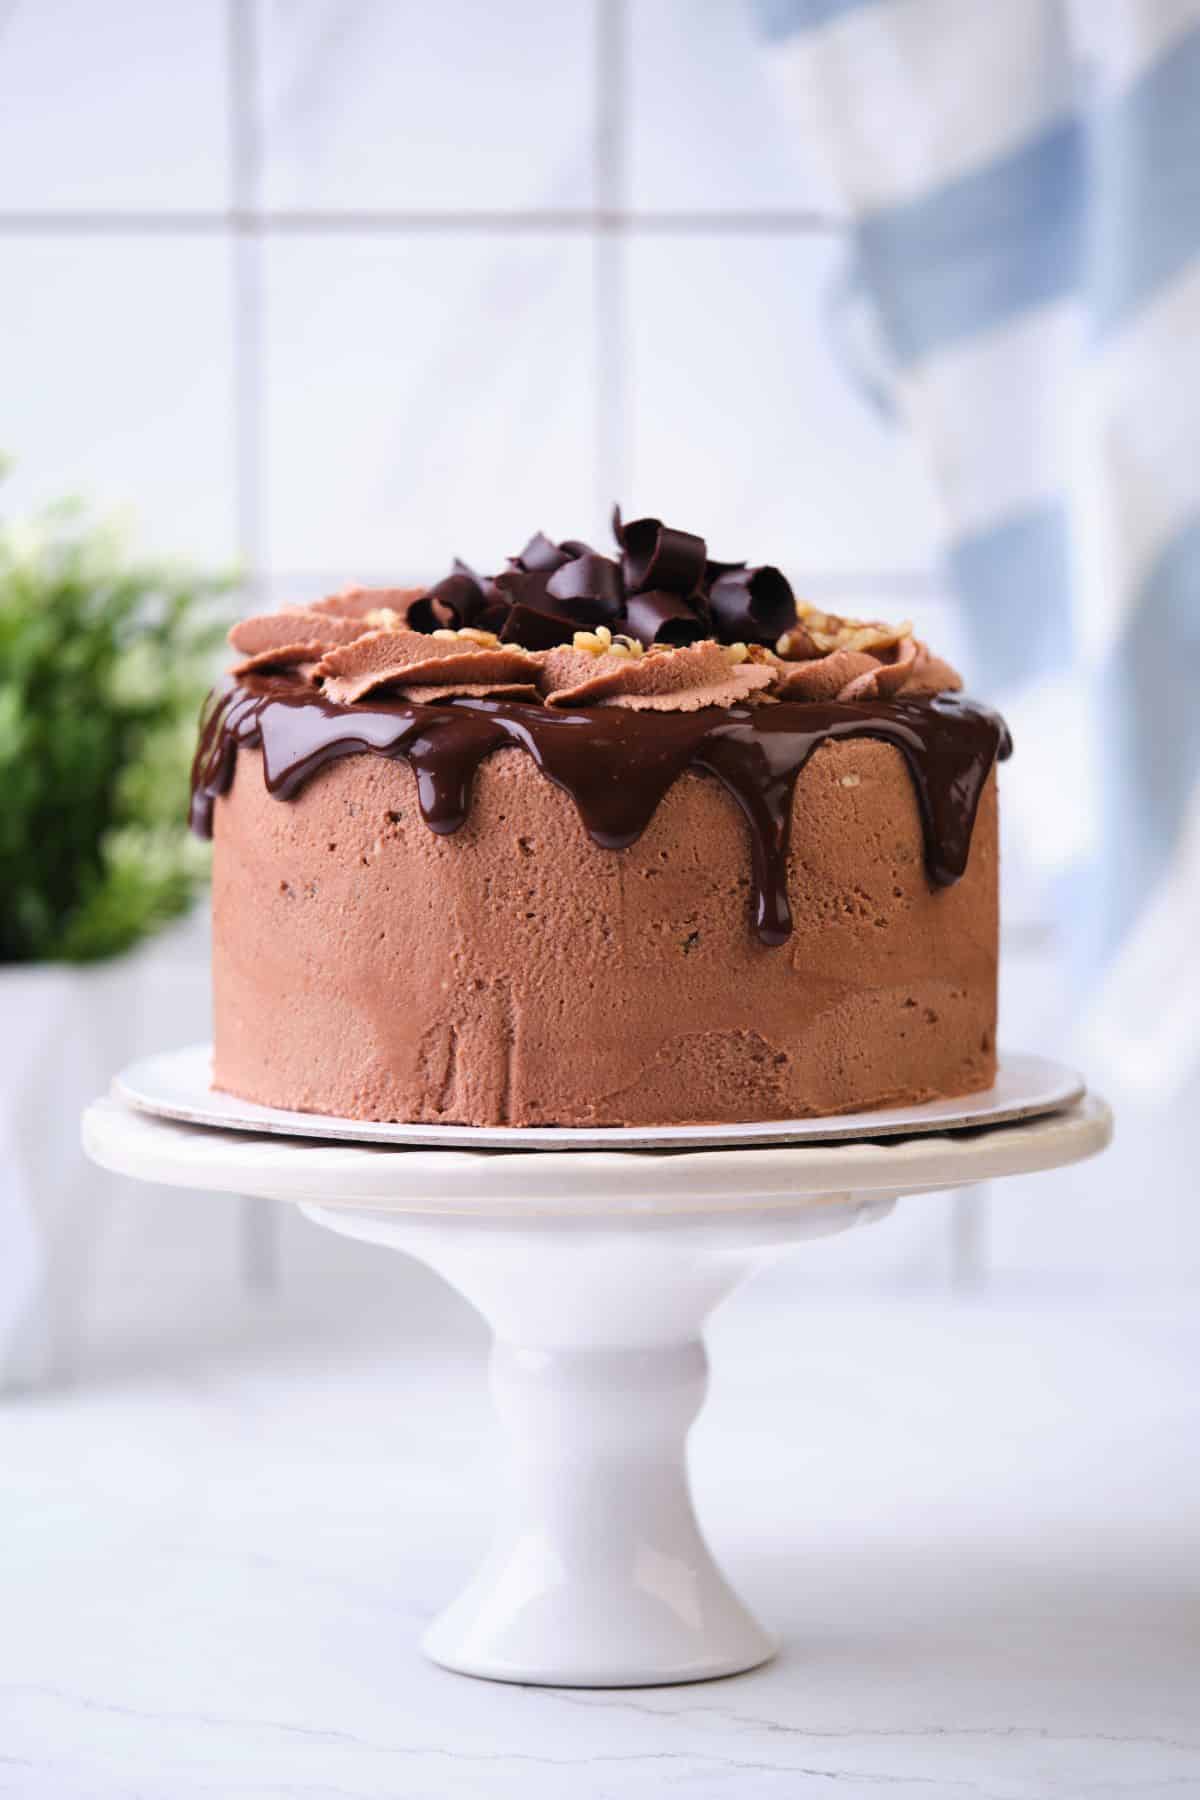 Free Photo | Choco cake getting sliced yummy delicious round whole  designing with kumquats nuts